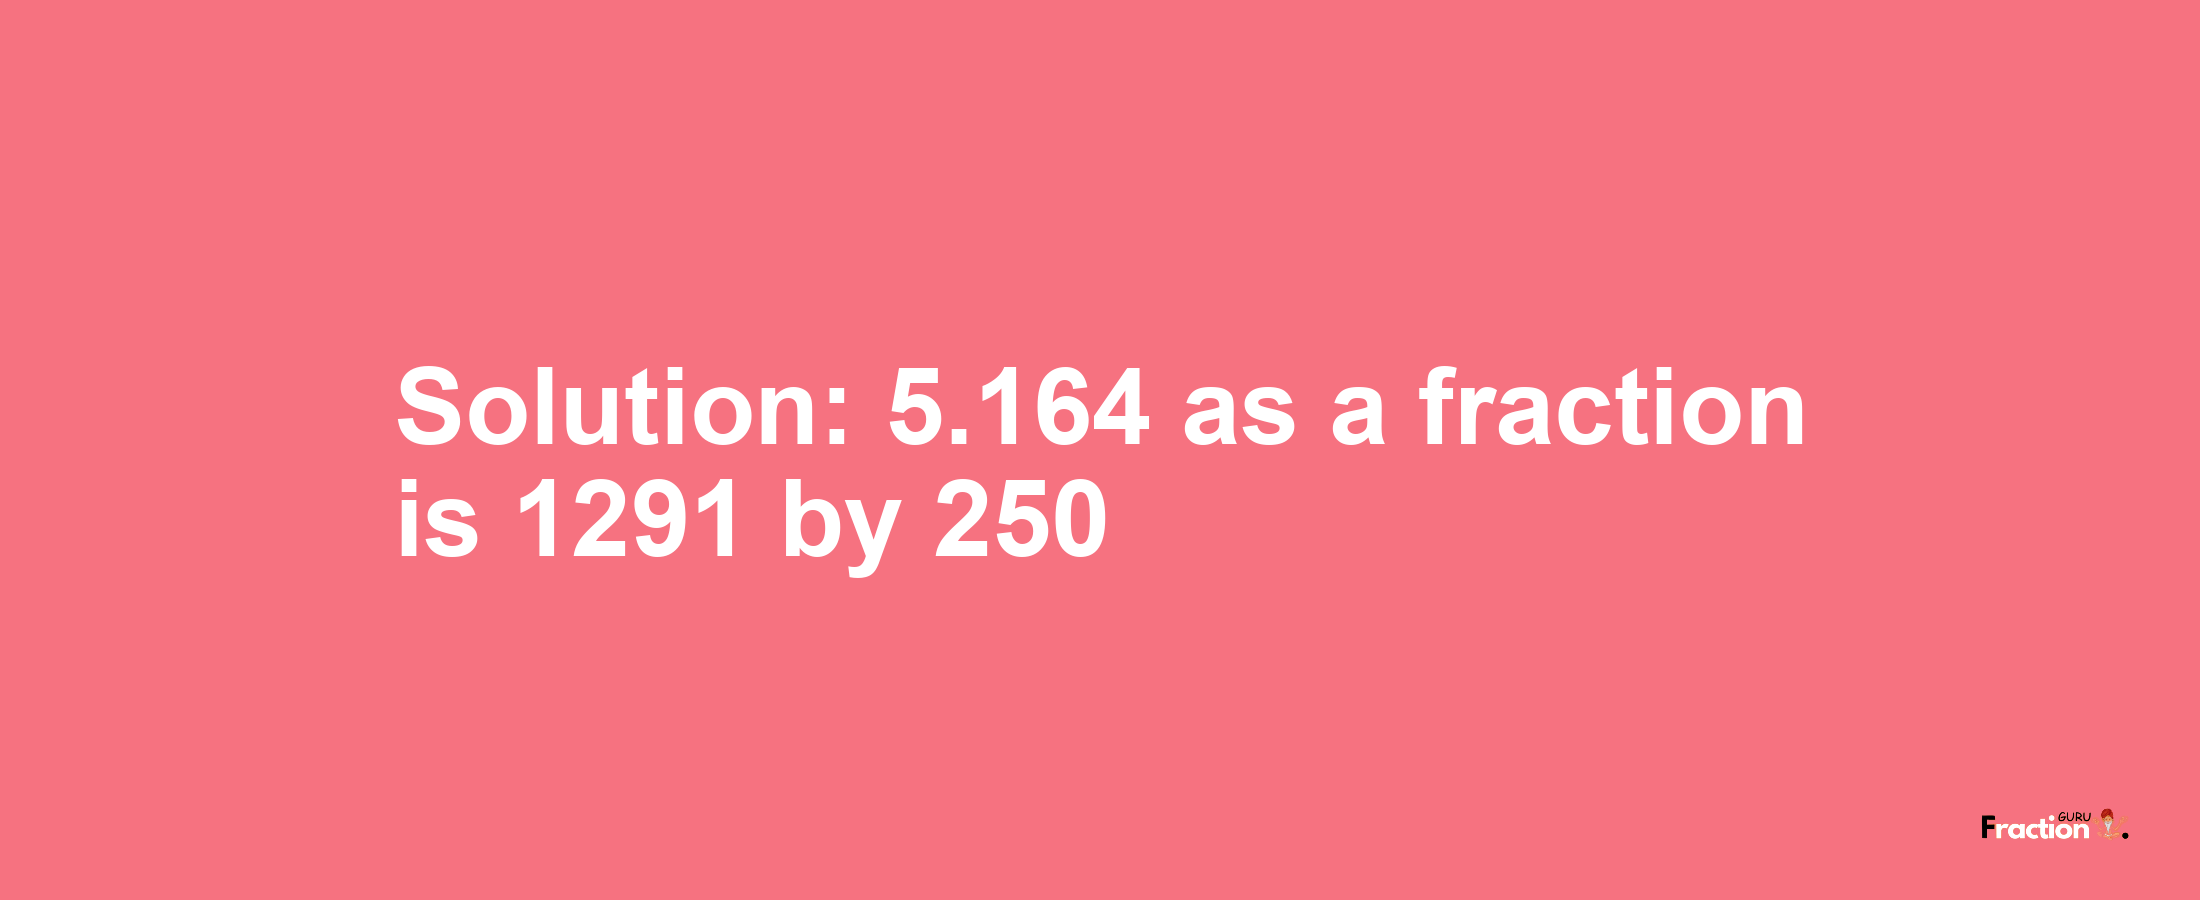 Solution:5.164 as a fraction is 1291/250